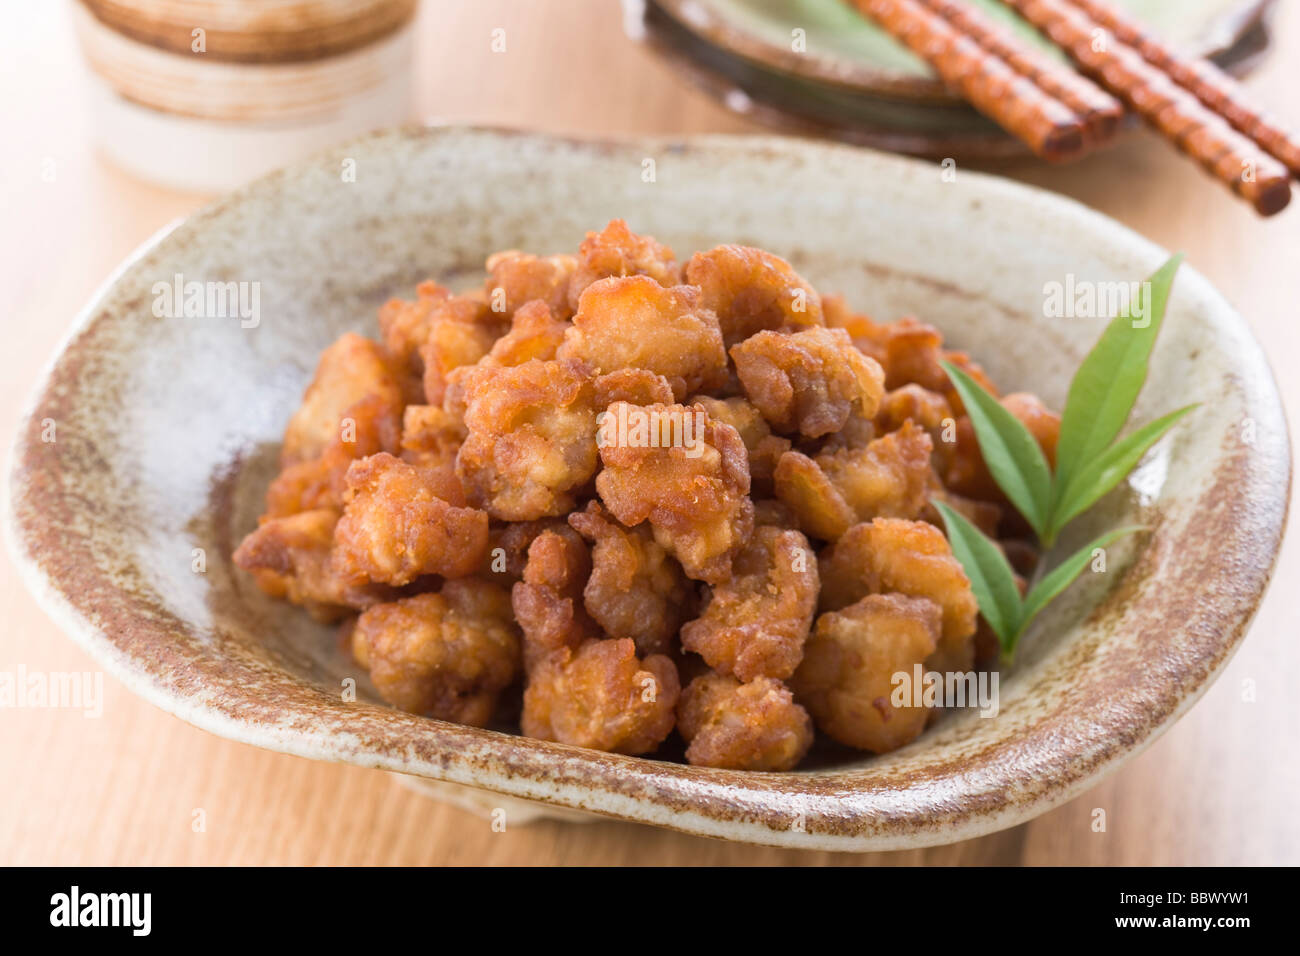 Fried Chicken Gristle Stock Photo